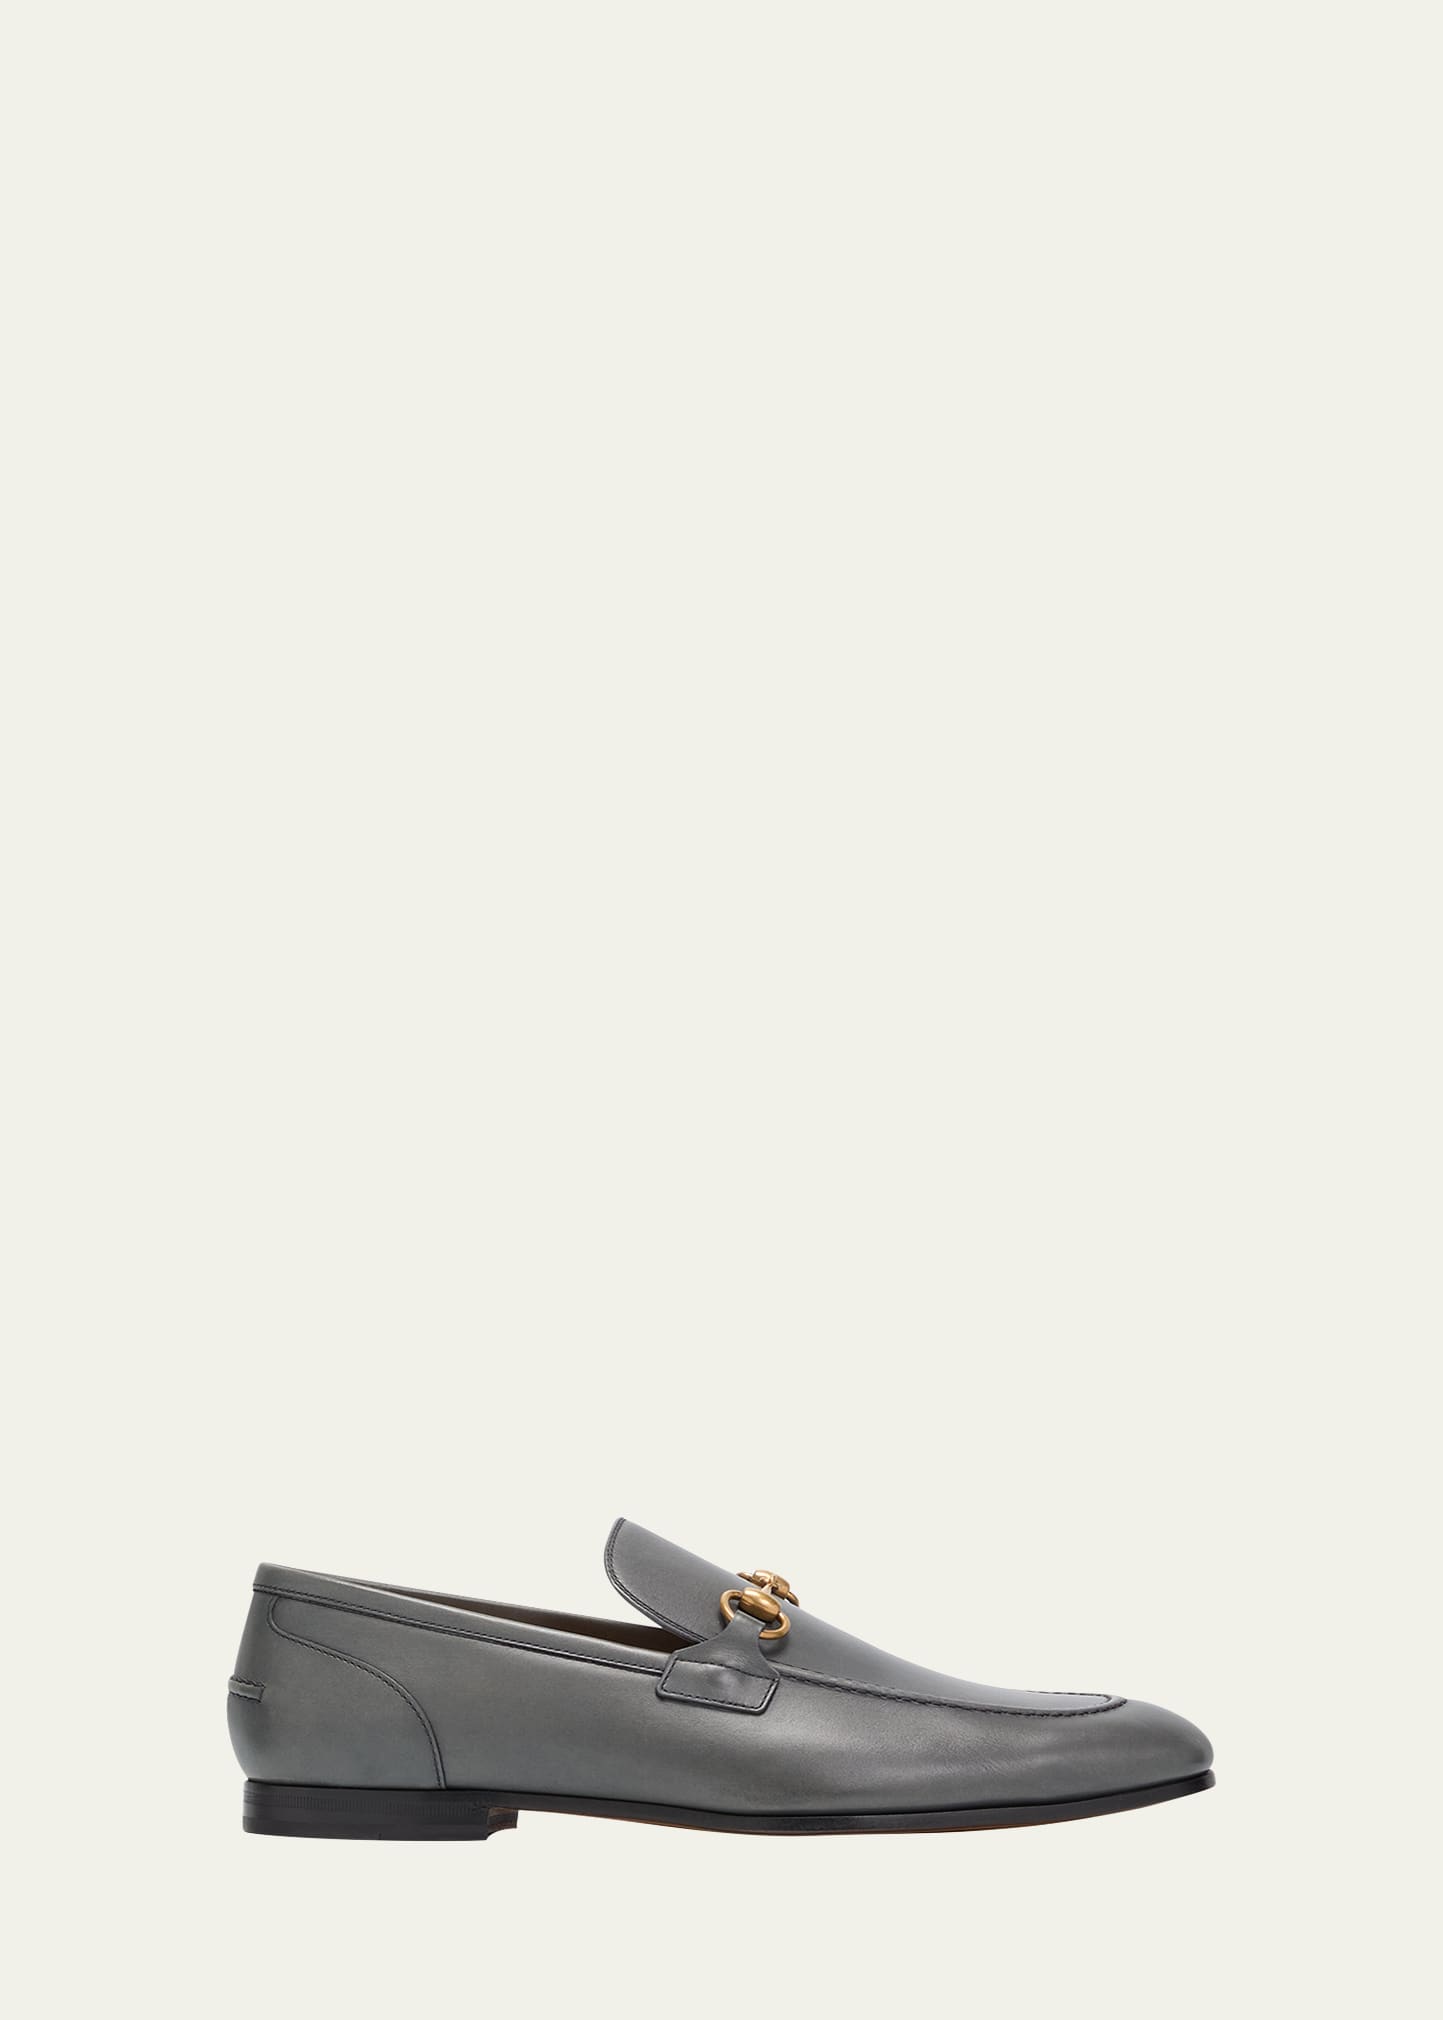 Gucci Men's Jordaan Leather Loafers In Graphite Grey